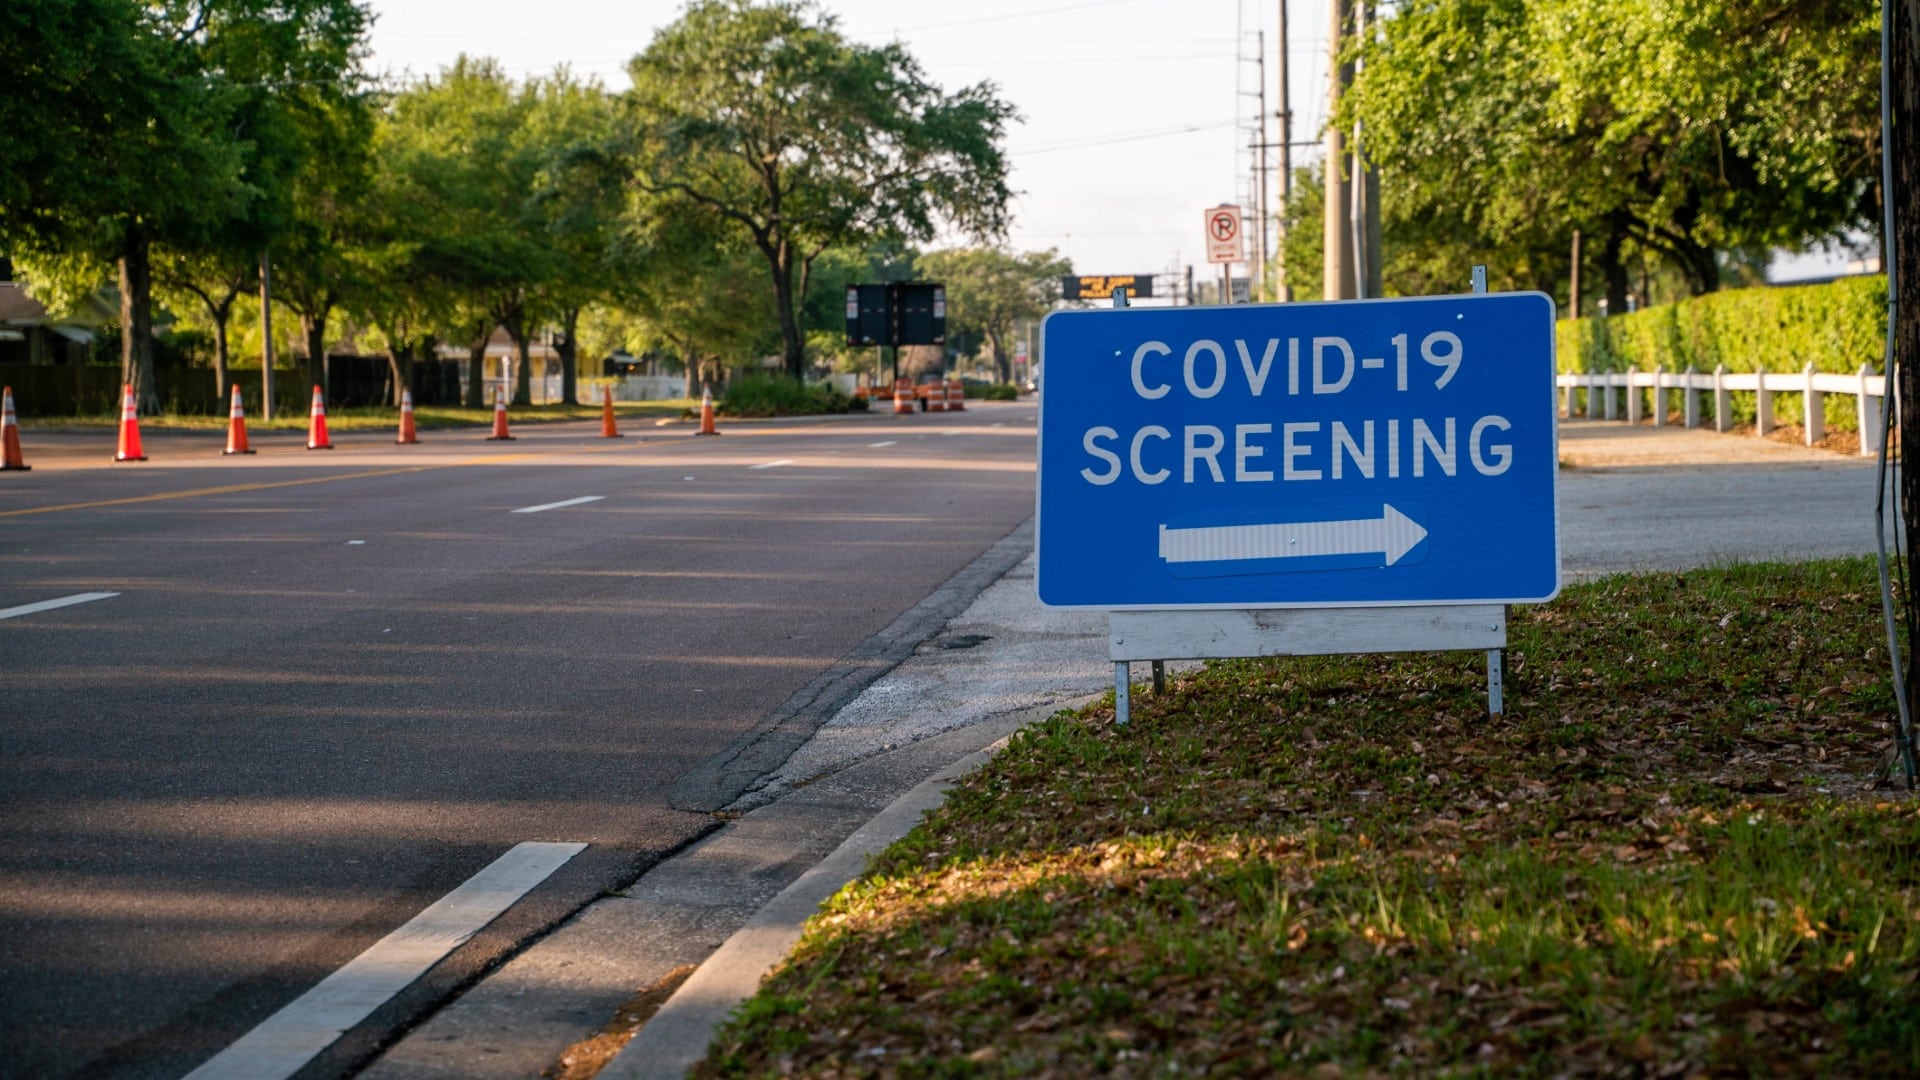 COVID-19 drive through testing location in Tampa, Florida